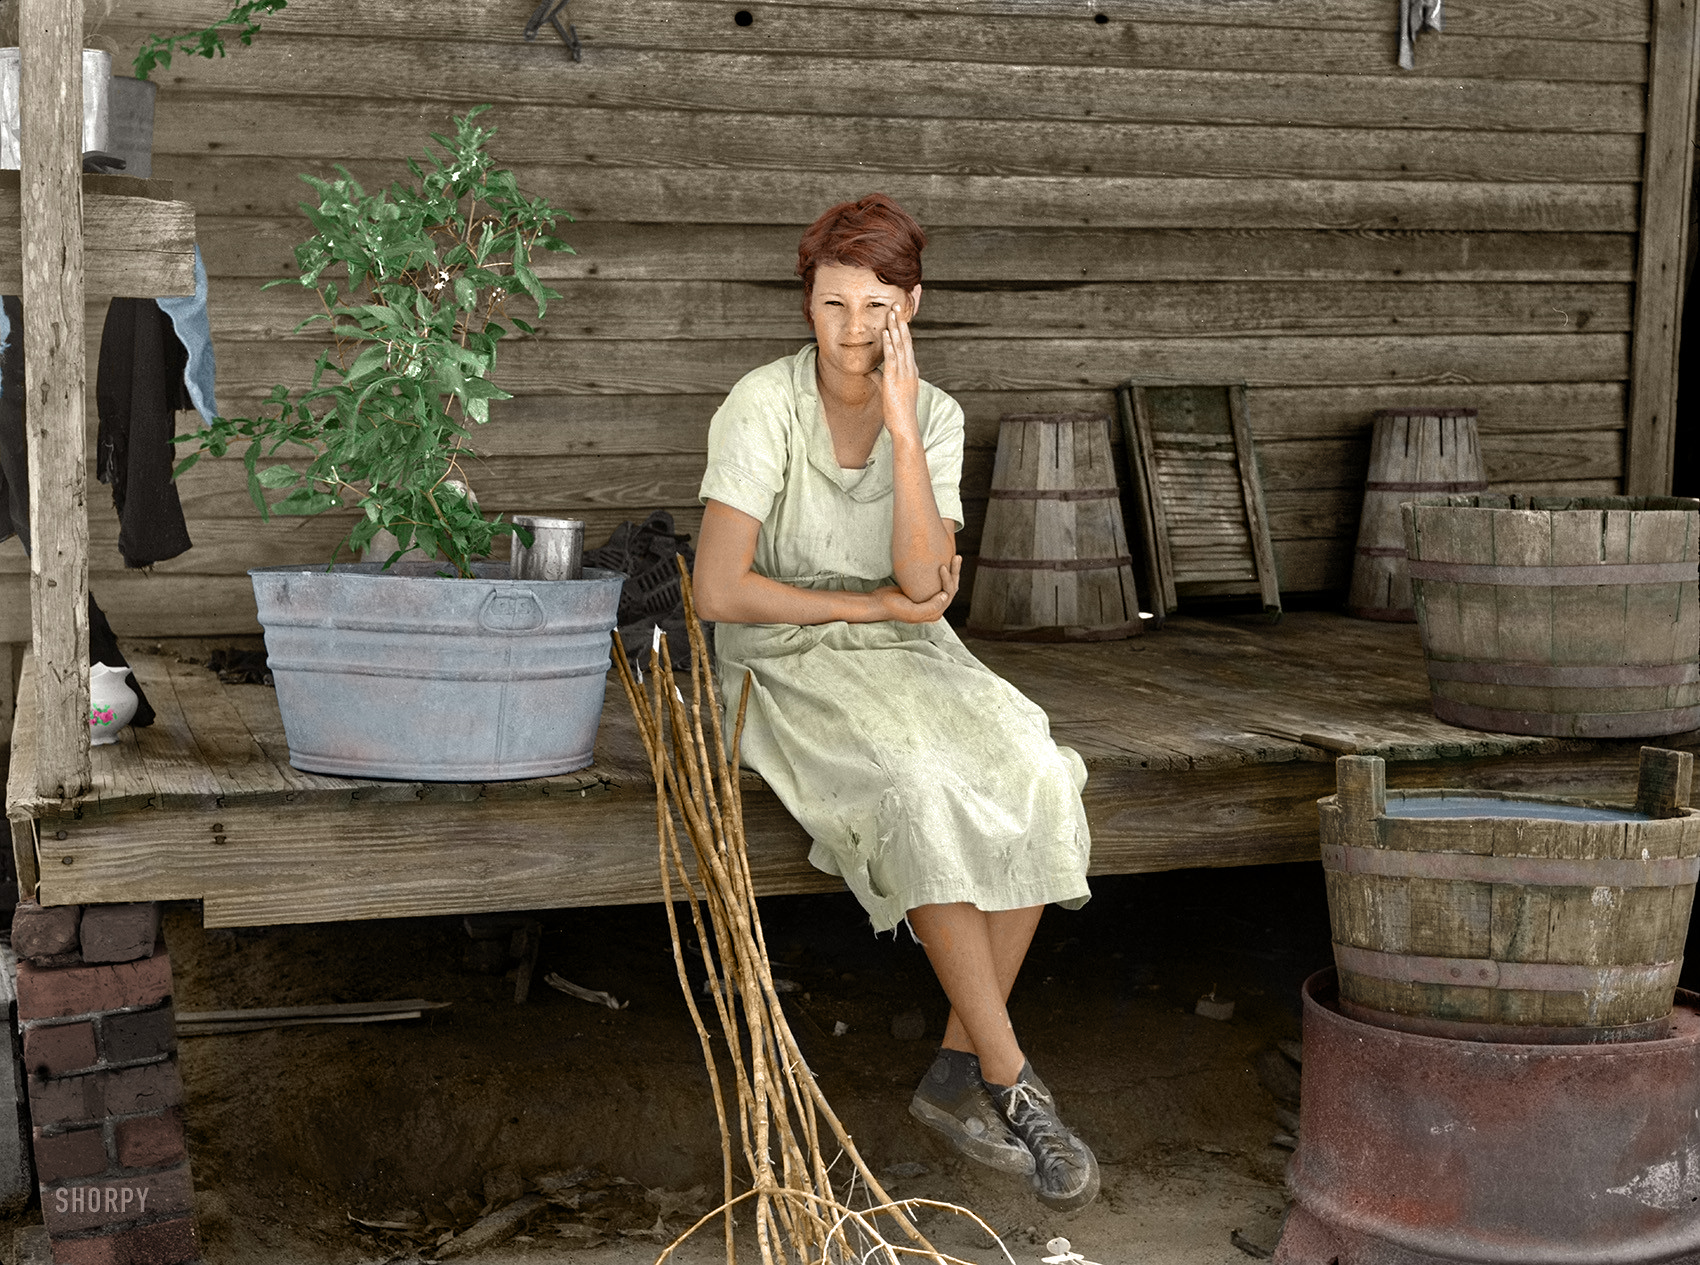 Shorpy Historical Picture Archive :: In the Sticks (Colorized): 1935